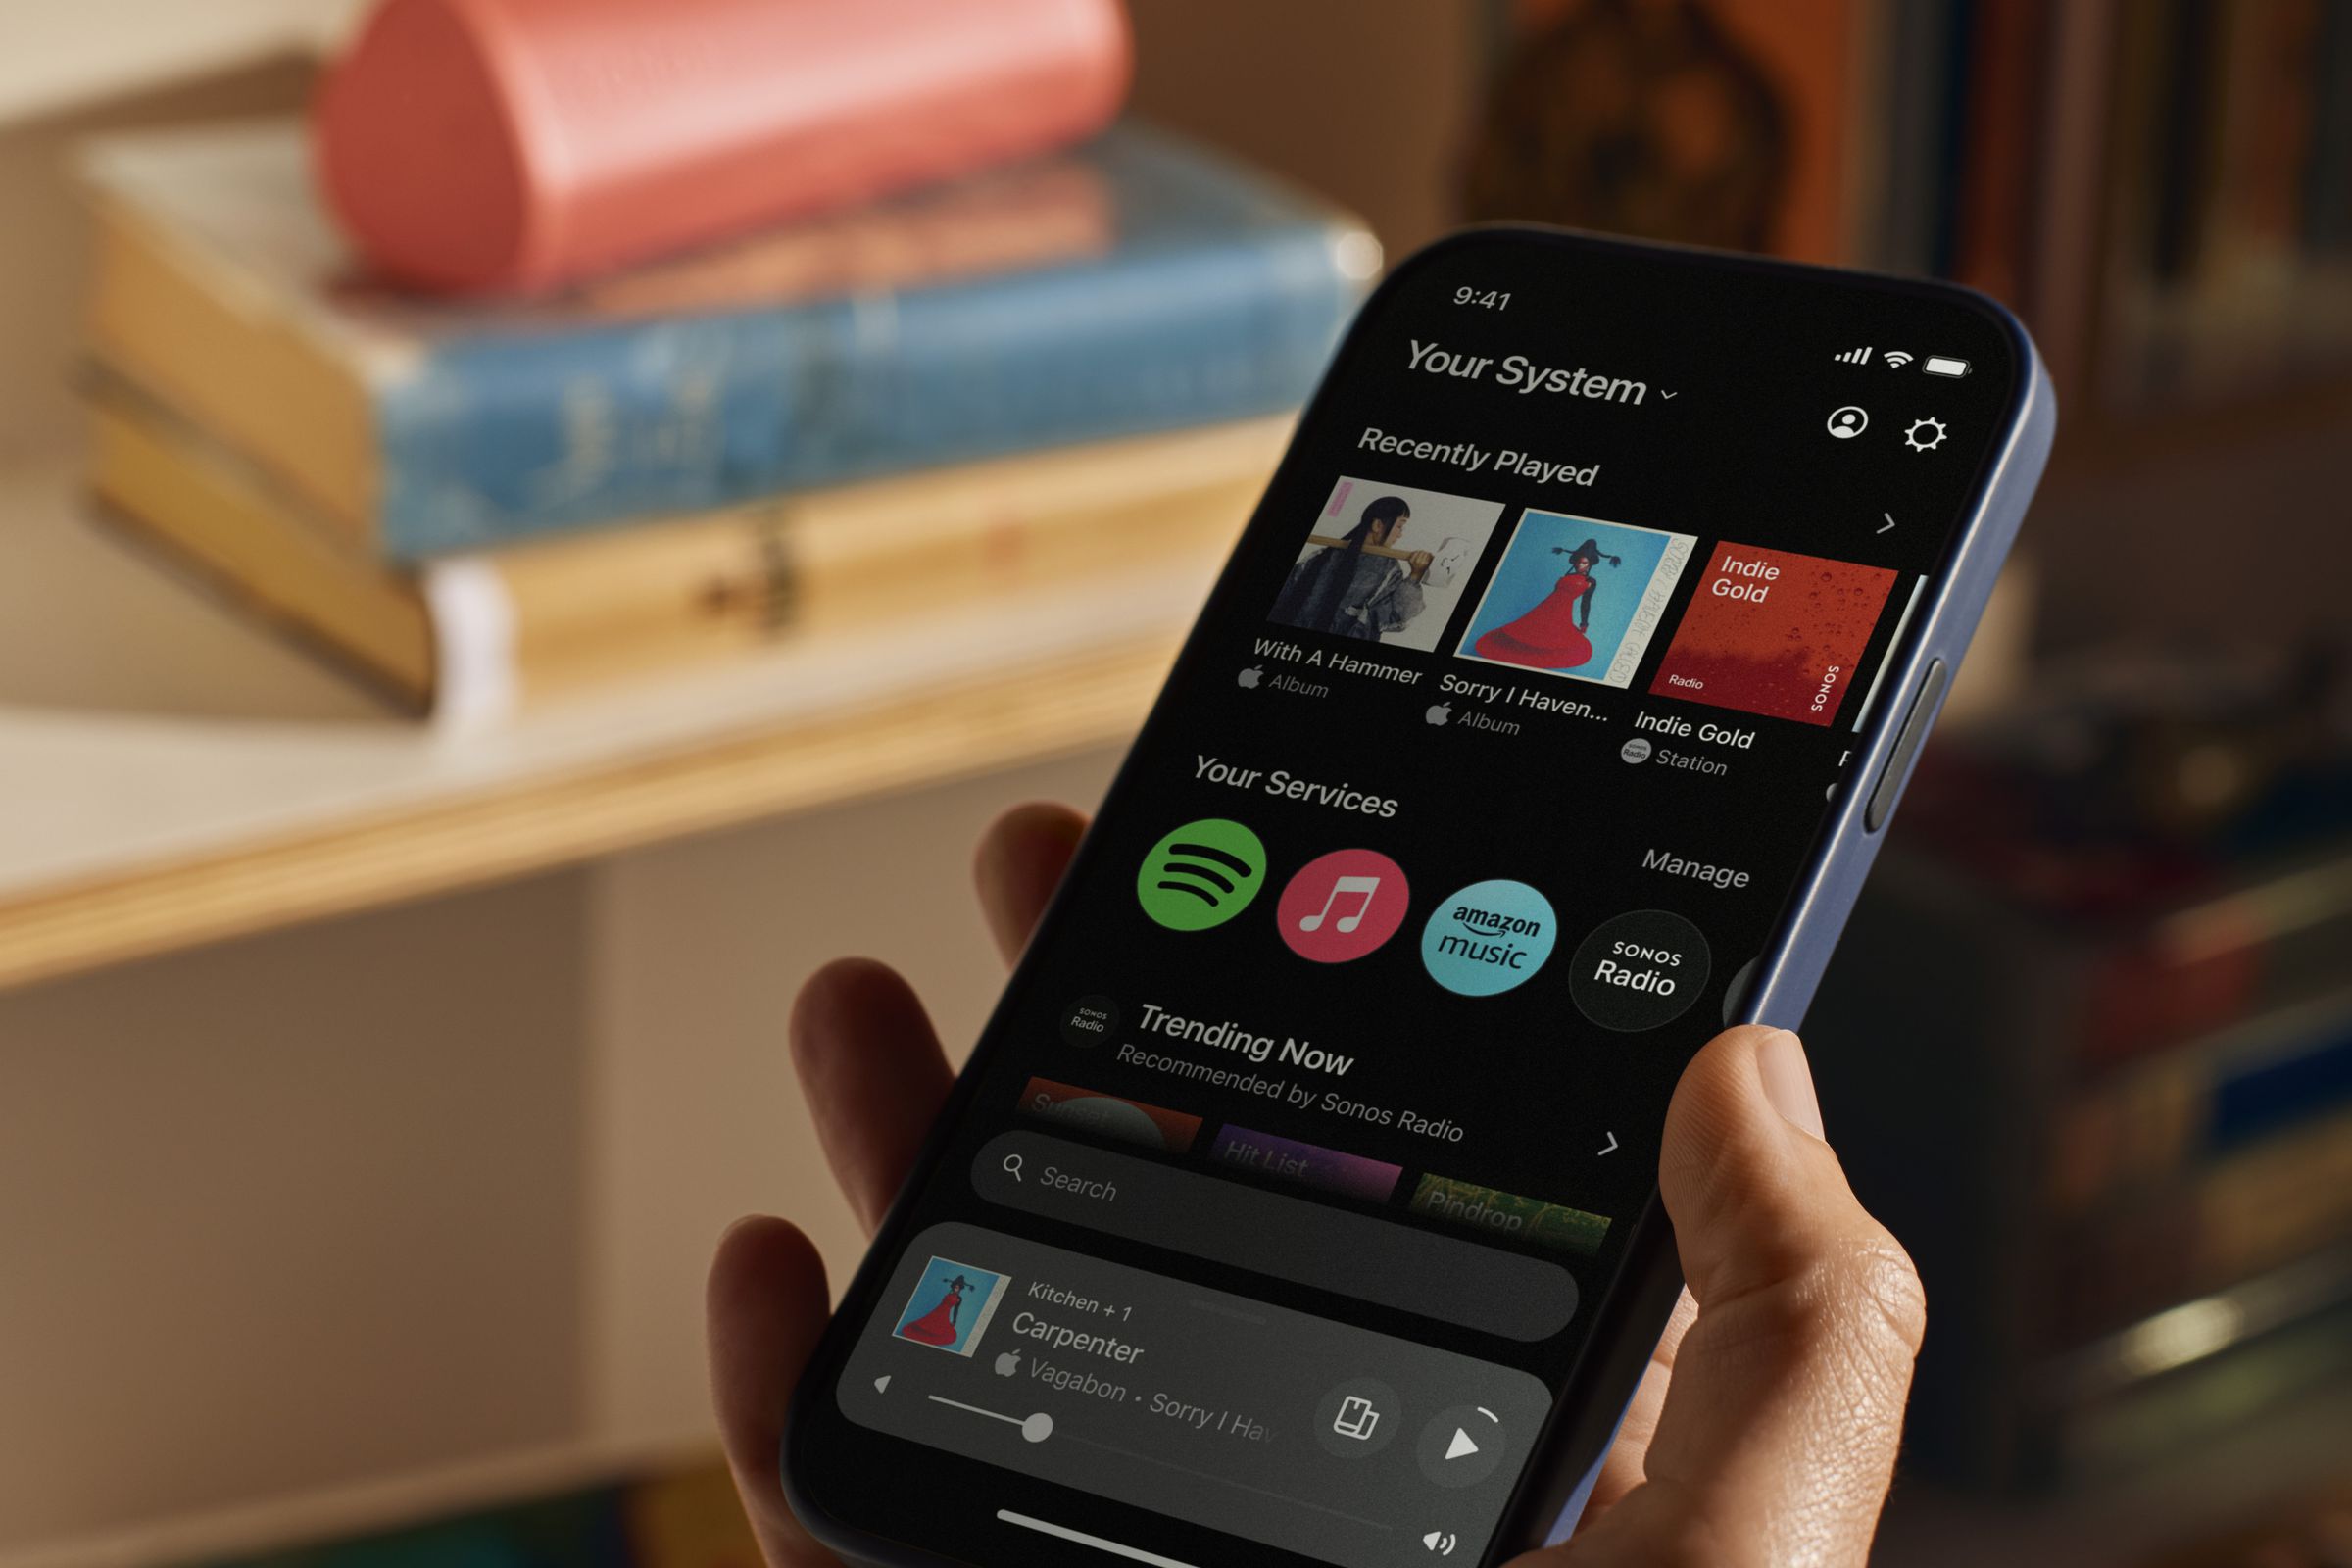 A marketing image of the new Sonos app.